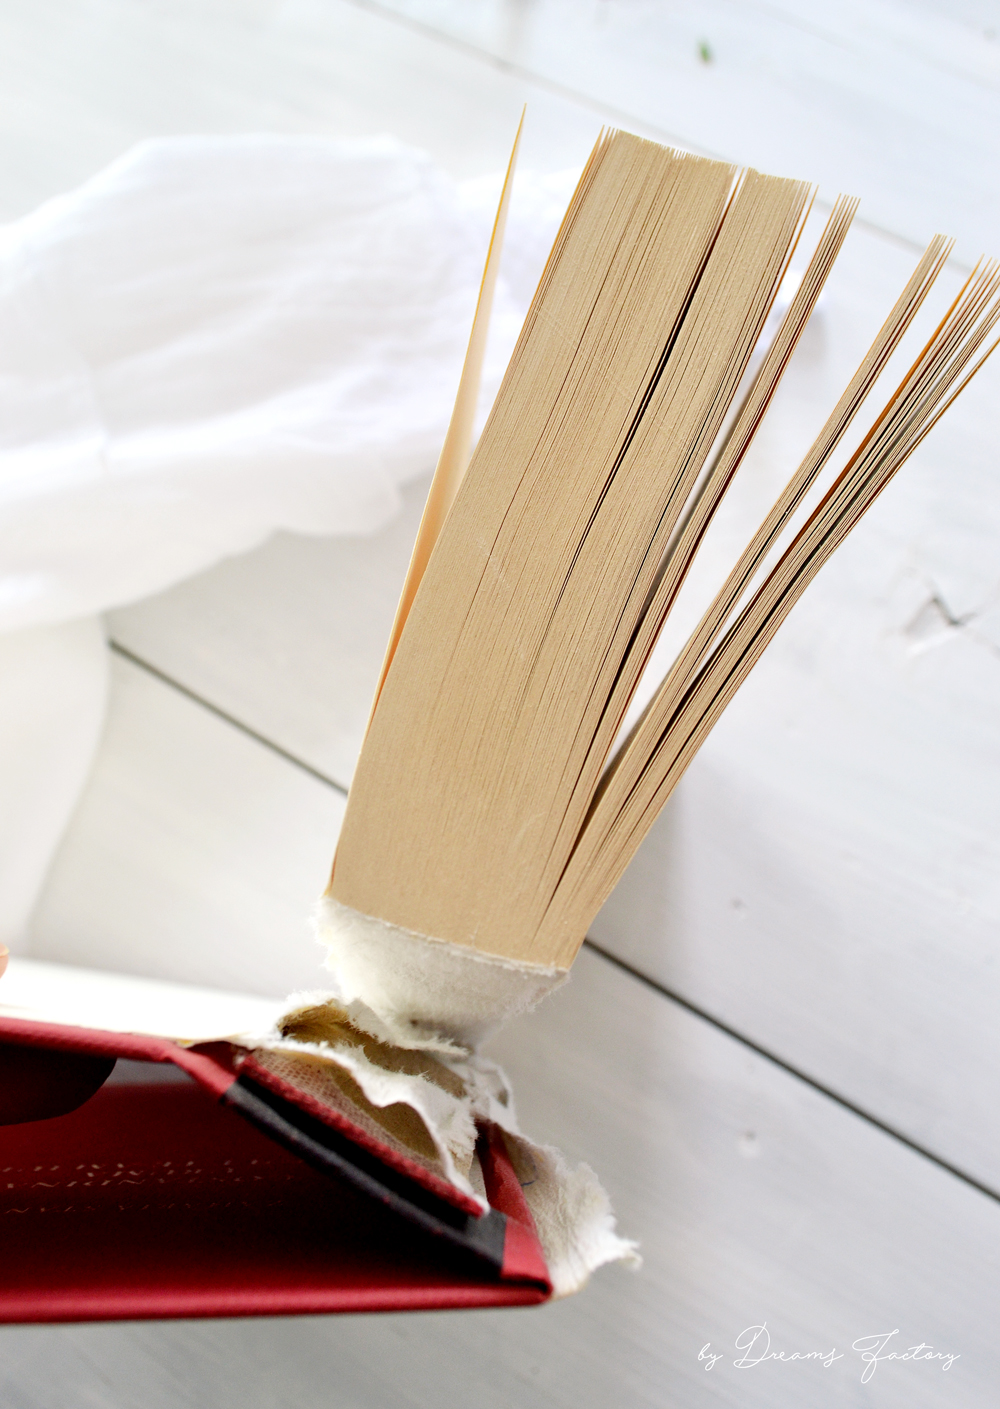 DIY Coffee Stained Vintage Books  #DIY #shabbychic #vintage #farmhouse #cottage